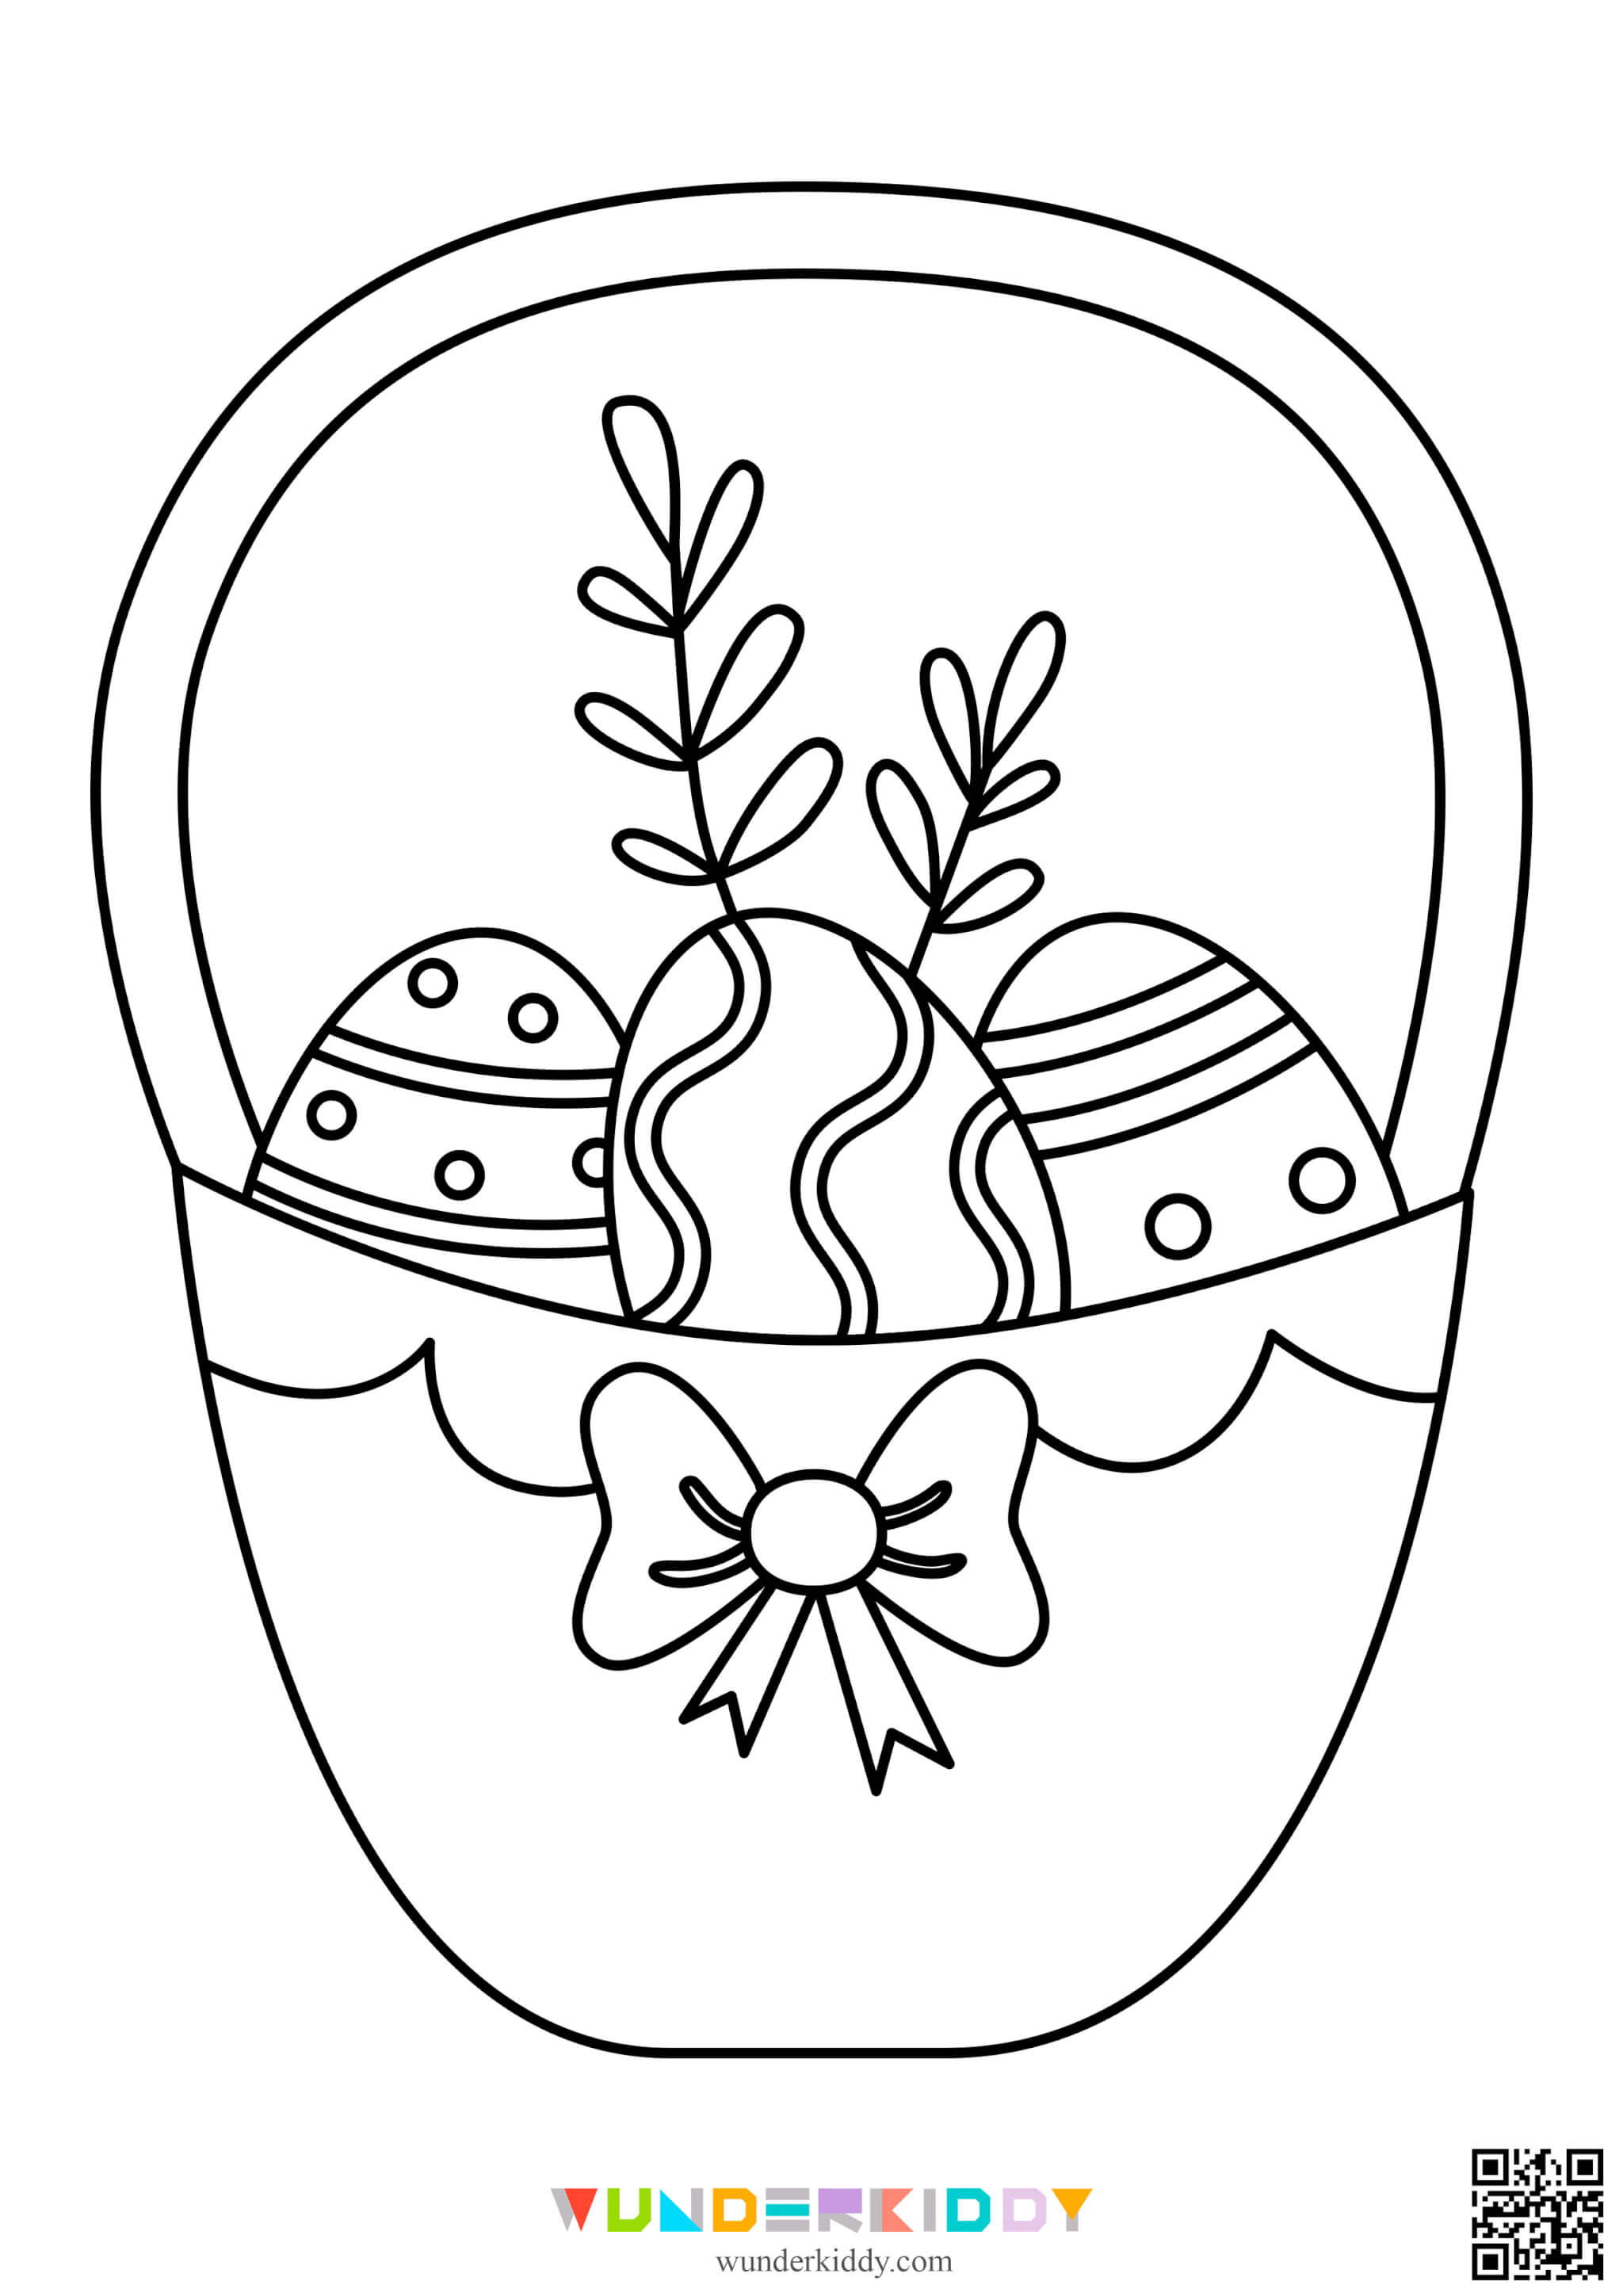 Easter Eggs Coloring Pages - Image 12